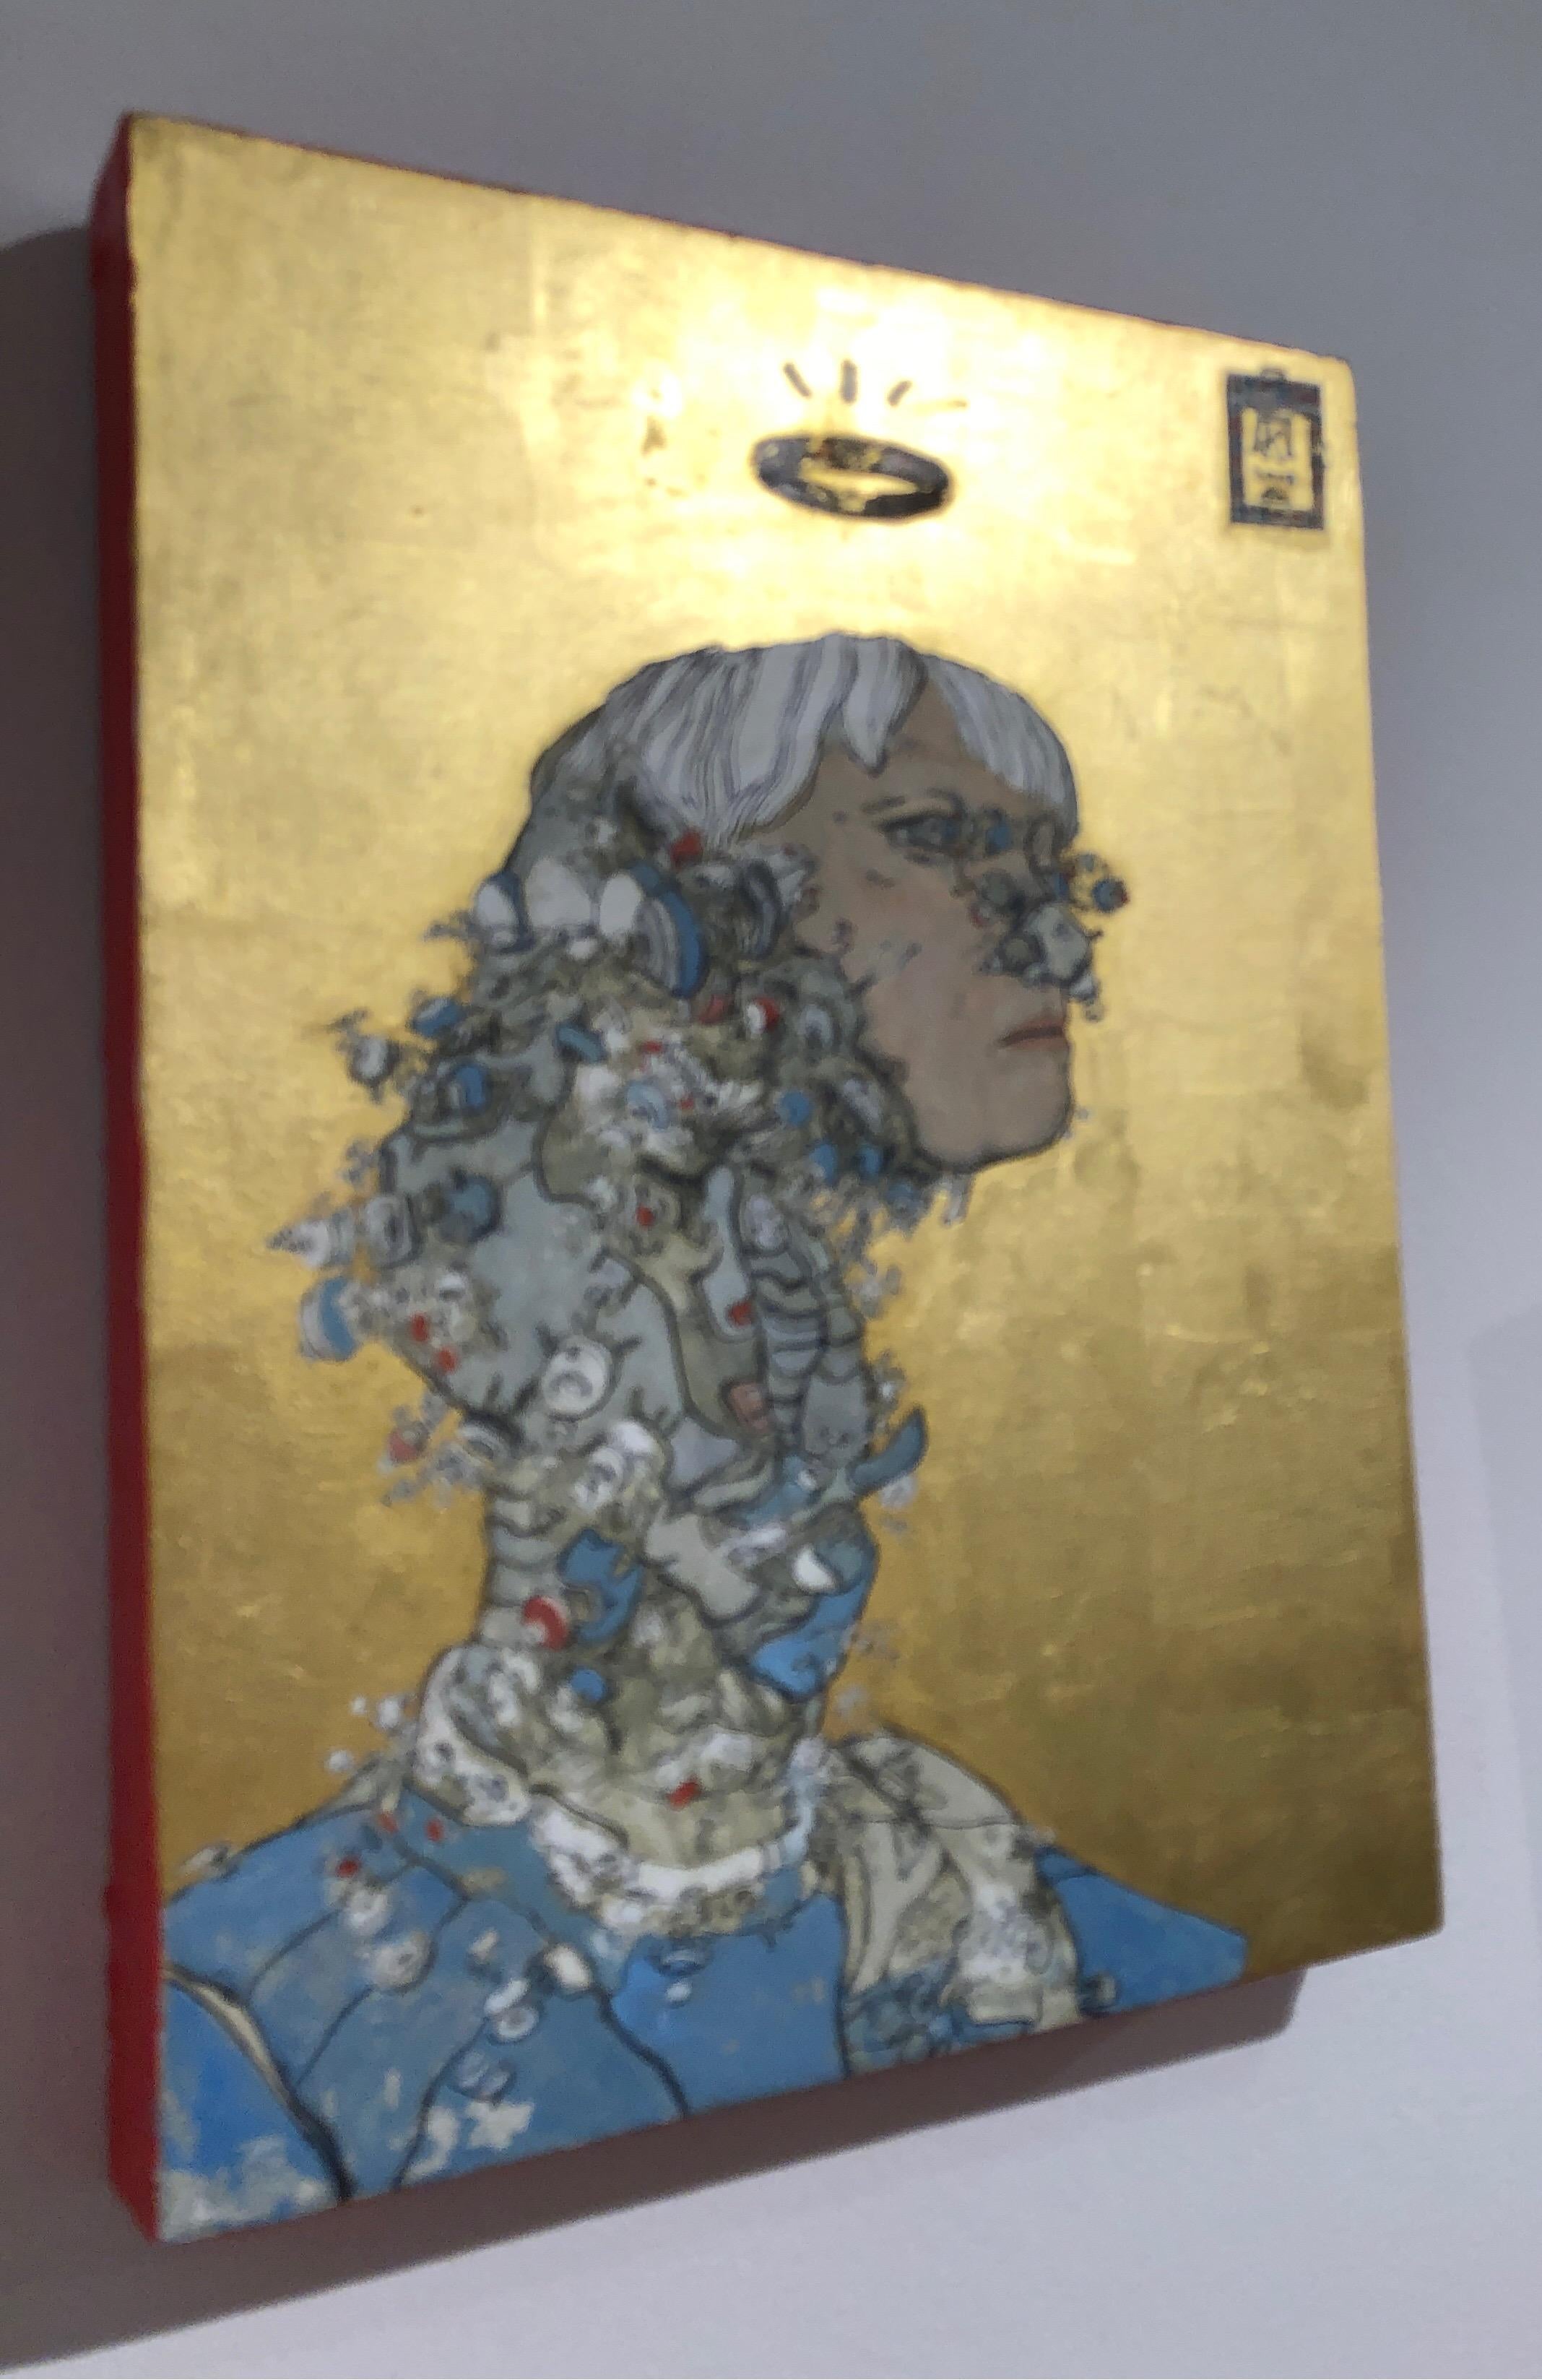 Queen Artemis as Medea, Sci-Fi inspired, Ink egg-tempera and gold leaf on panel - Gold Portrait Painting by Konstantinos Papamichalopoulos